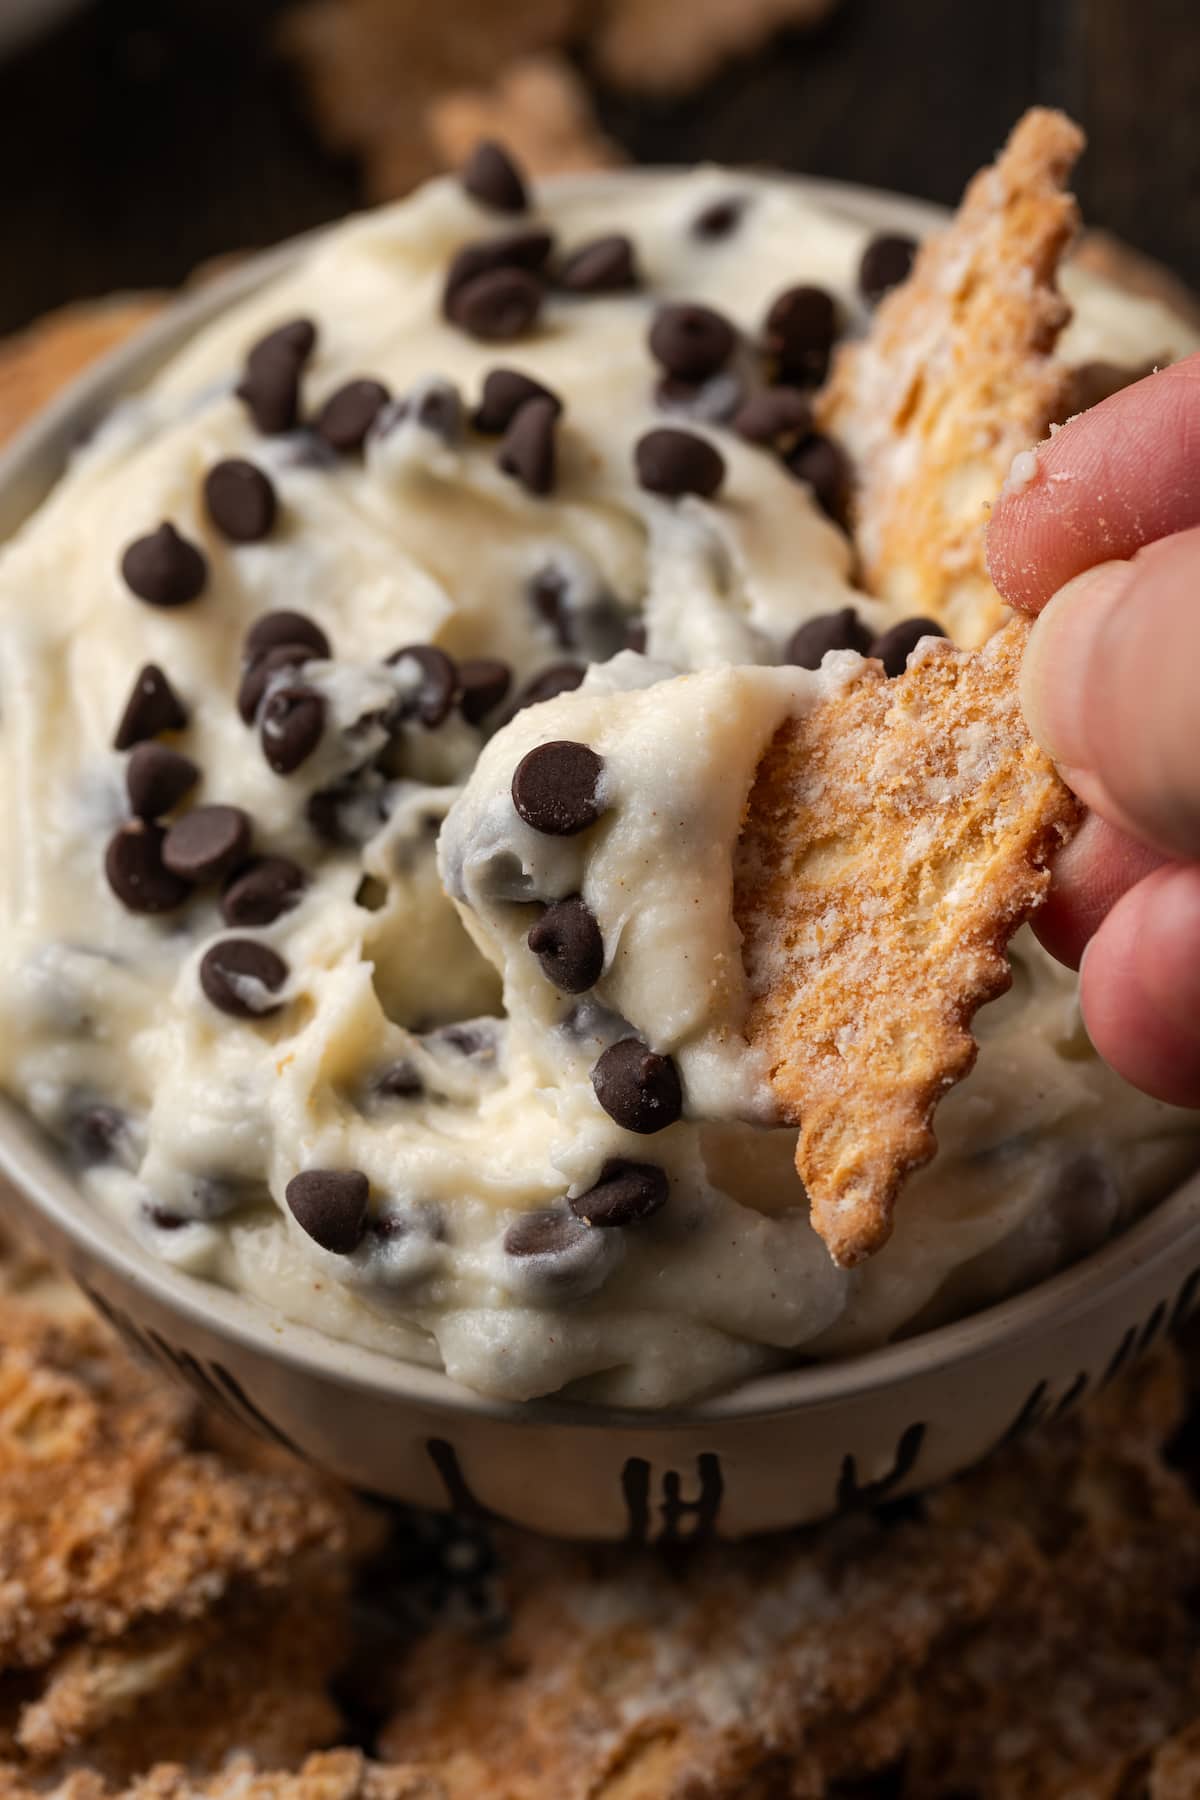 A hand dips a cookie into a bowl of cannoli dip.